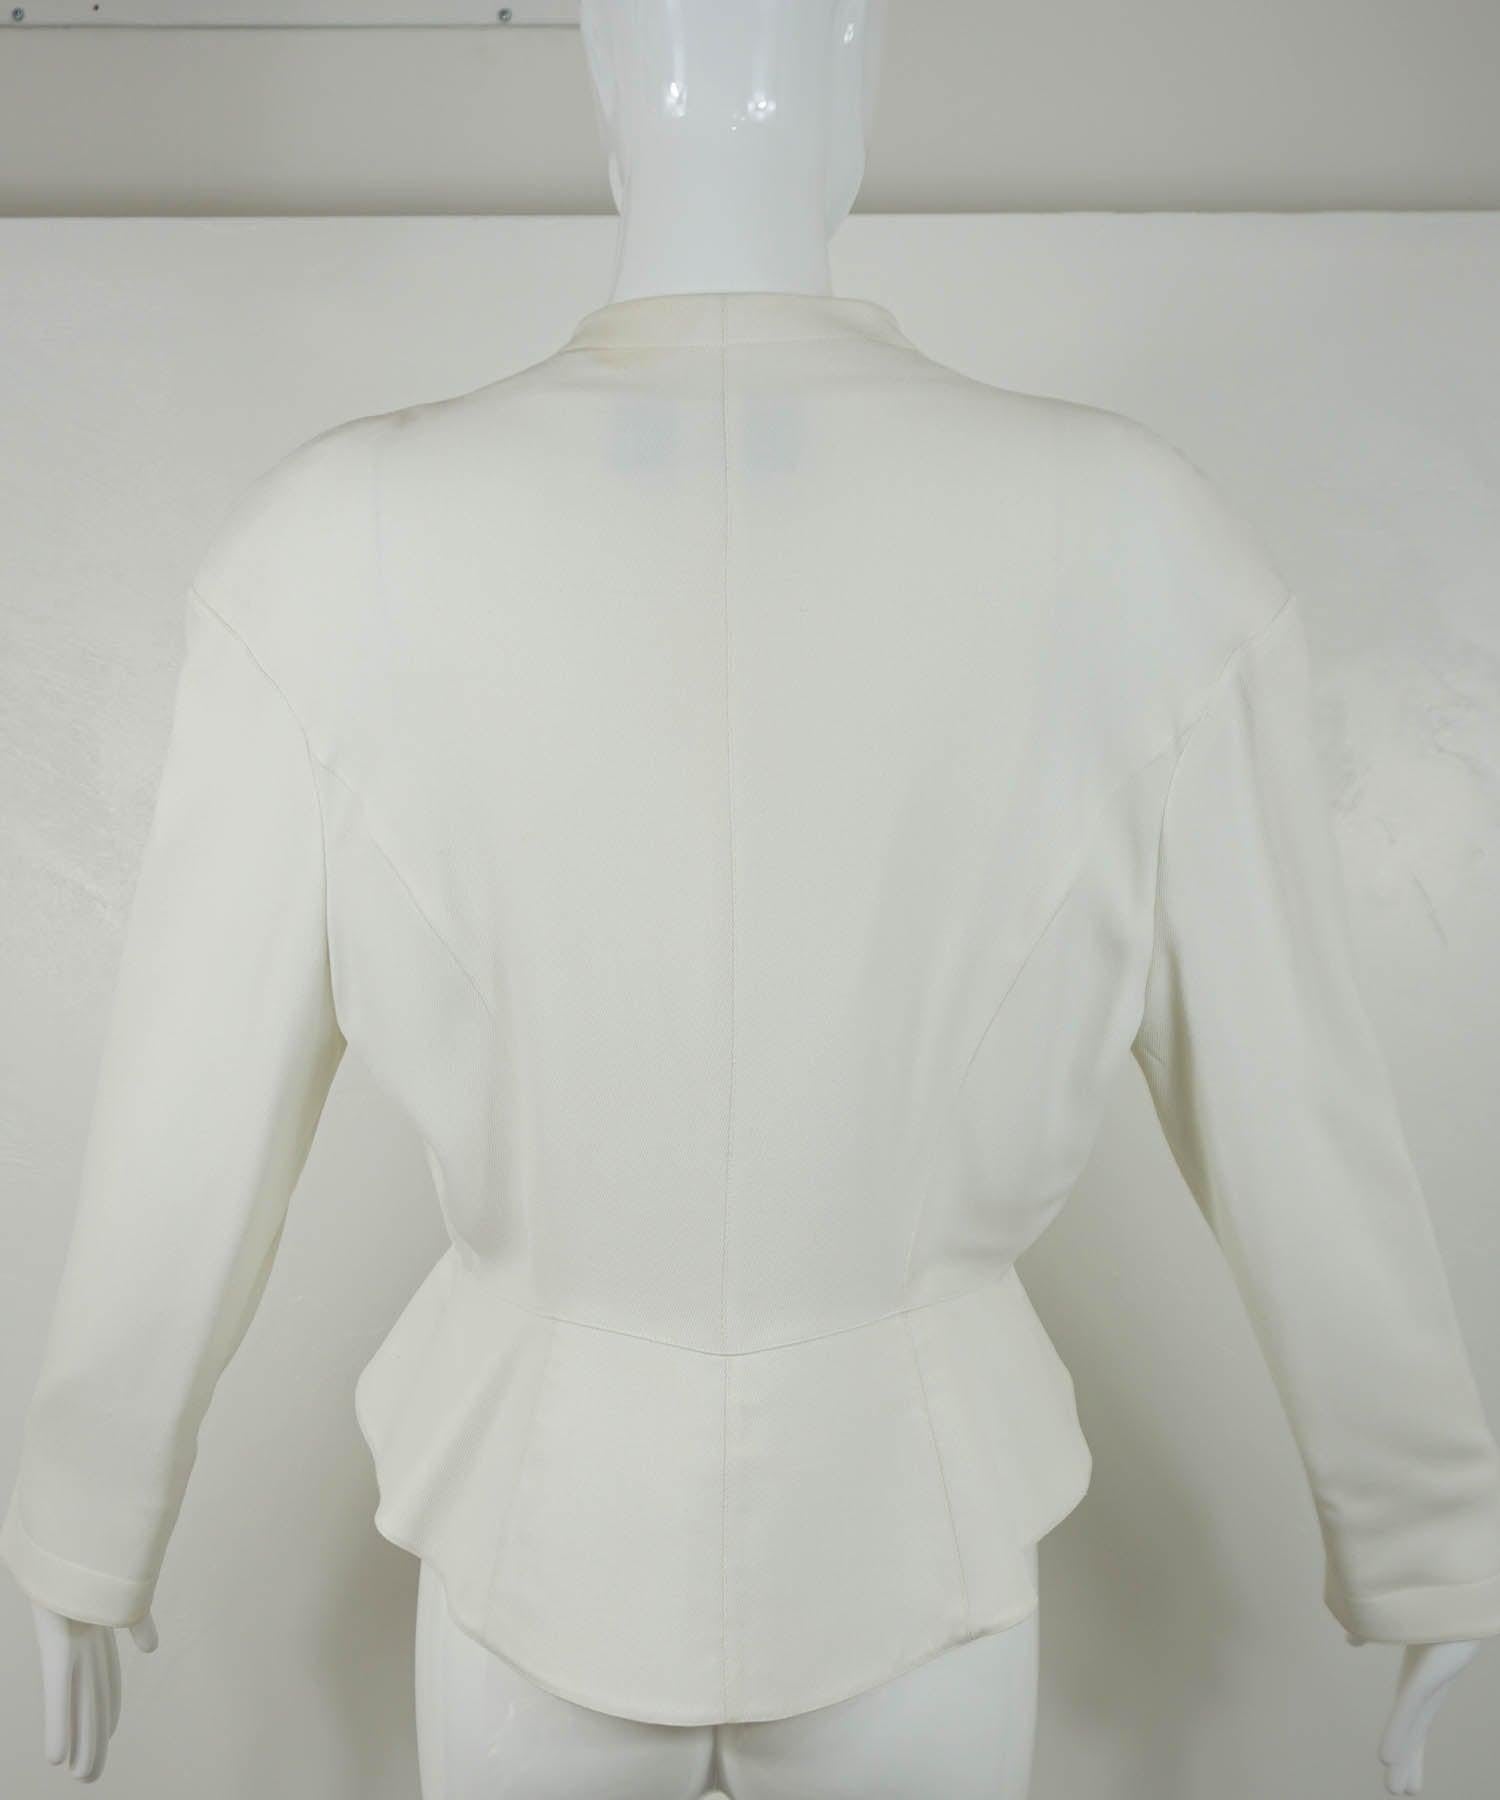 Thierry Mugler White Vintage Hourglass Logo Star Blazer 1990's Era In Good Condition For Sale In Carmel, CA